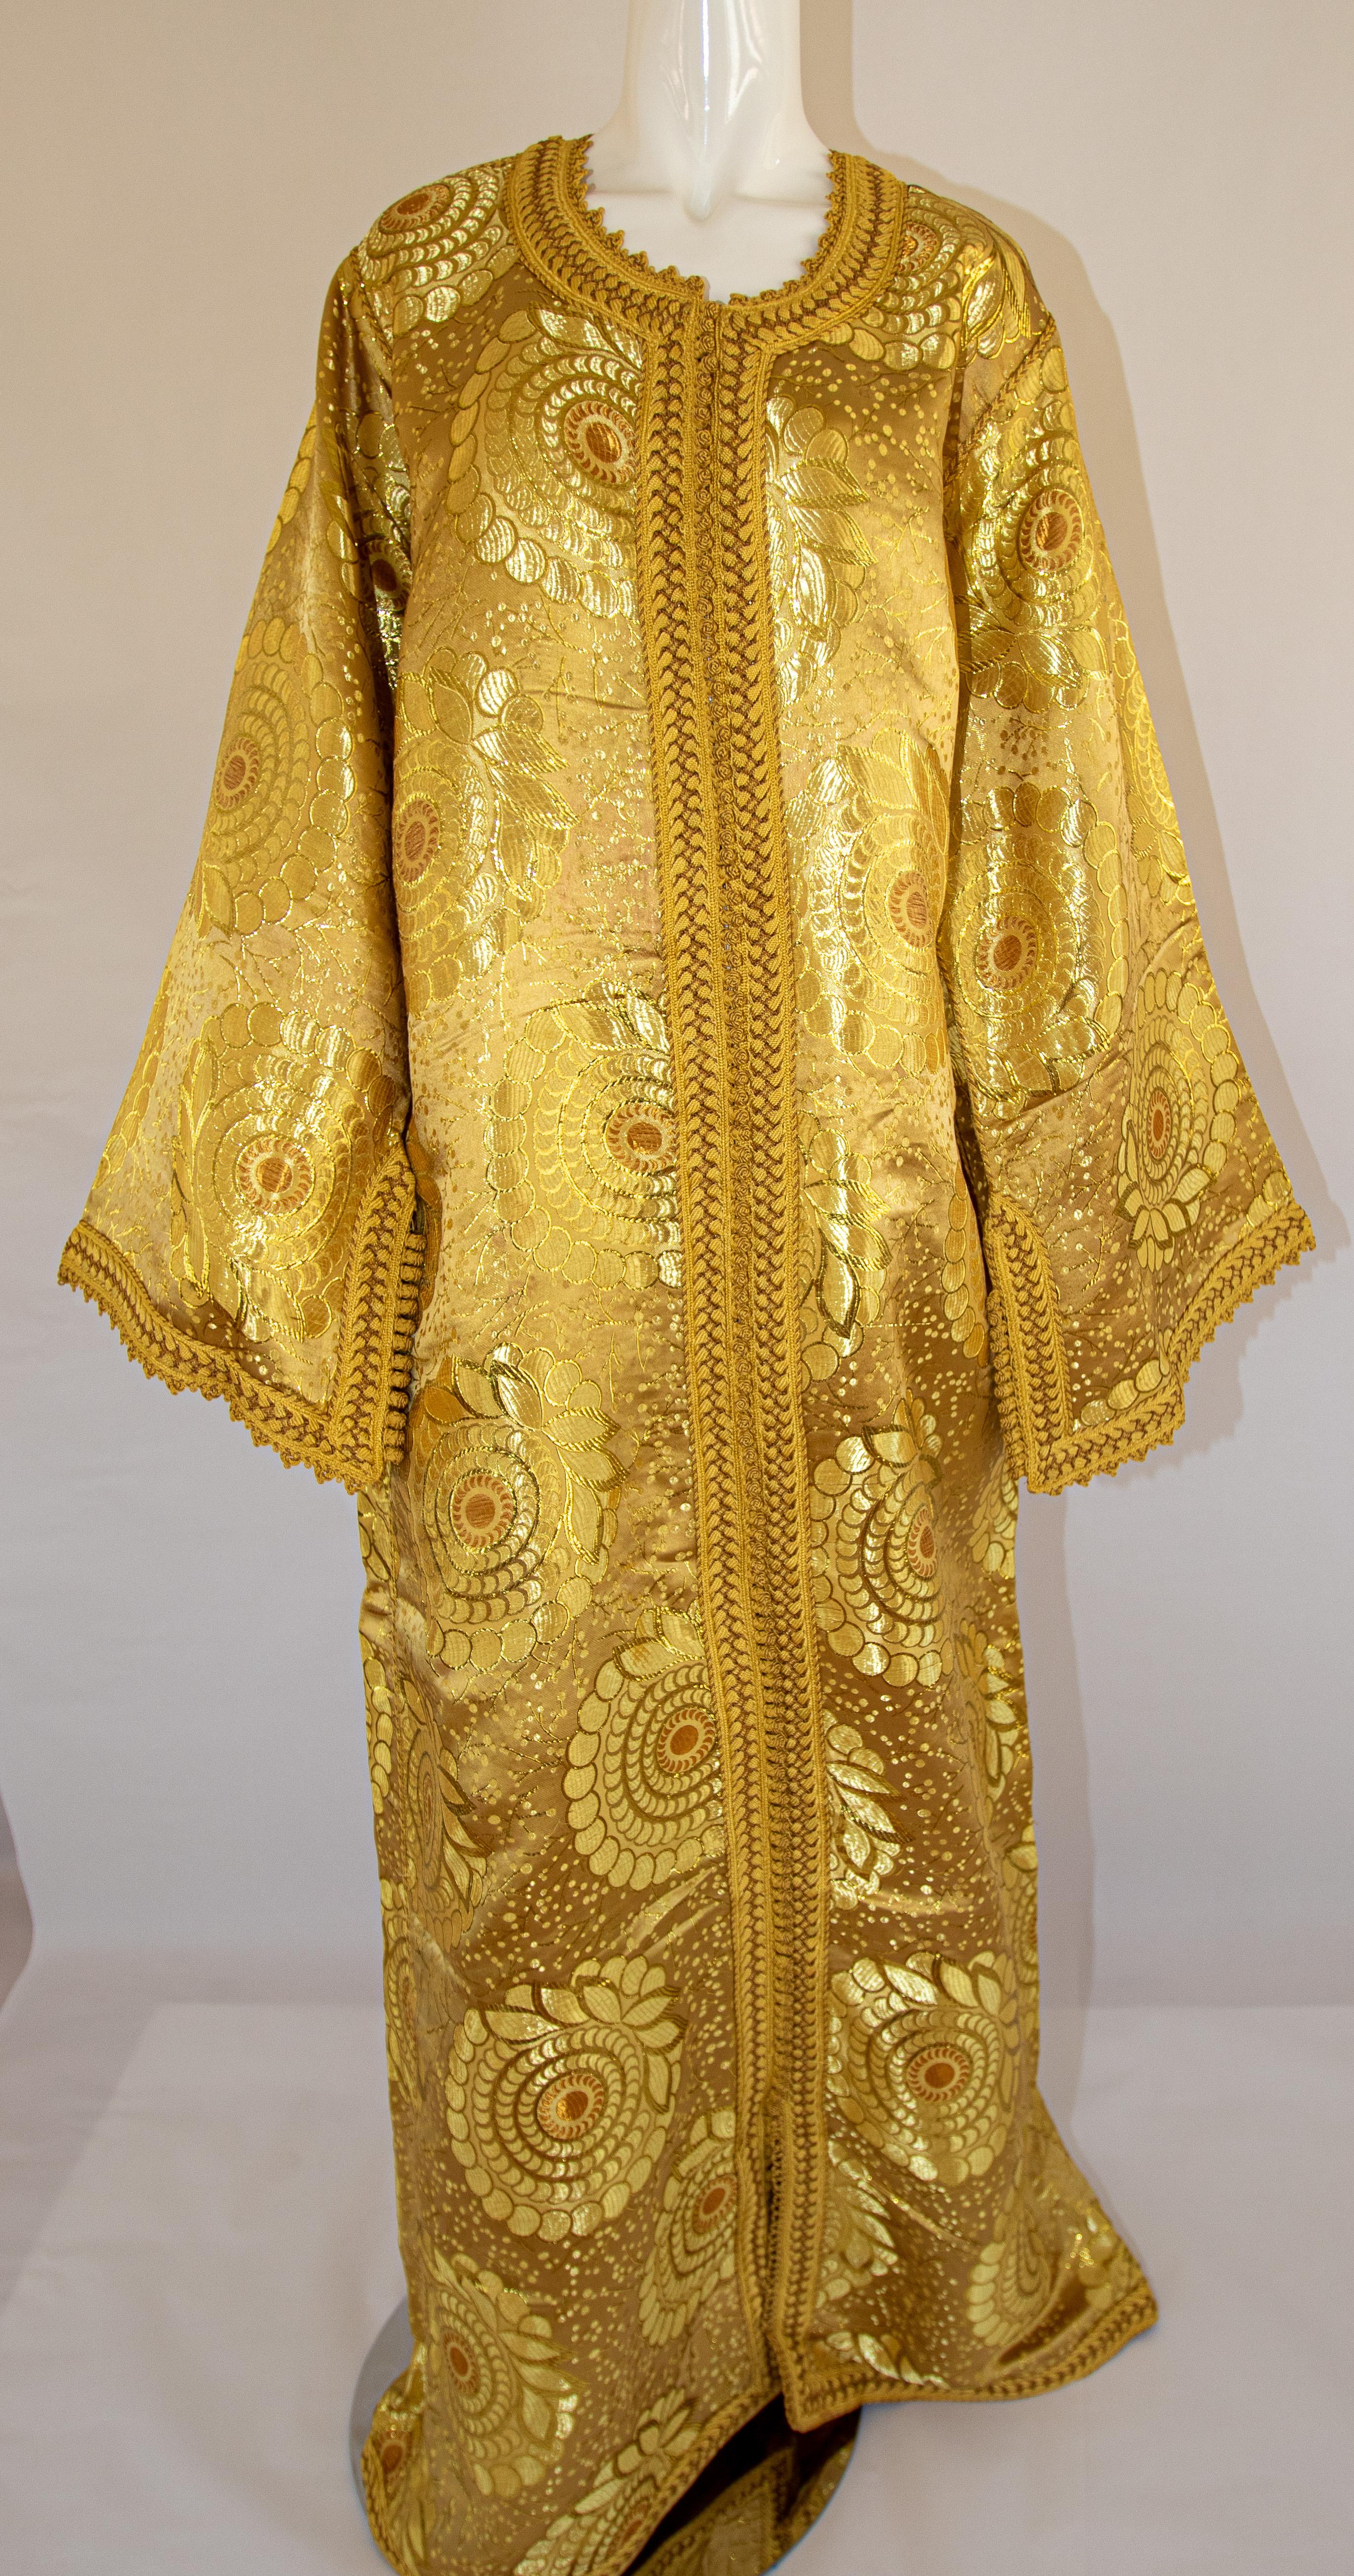 Moroccan Vintage Caftan Gown in Gold Brocade Maxi Dress Kaftan Size L to XL For Sale 8